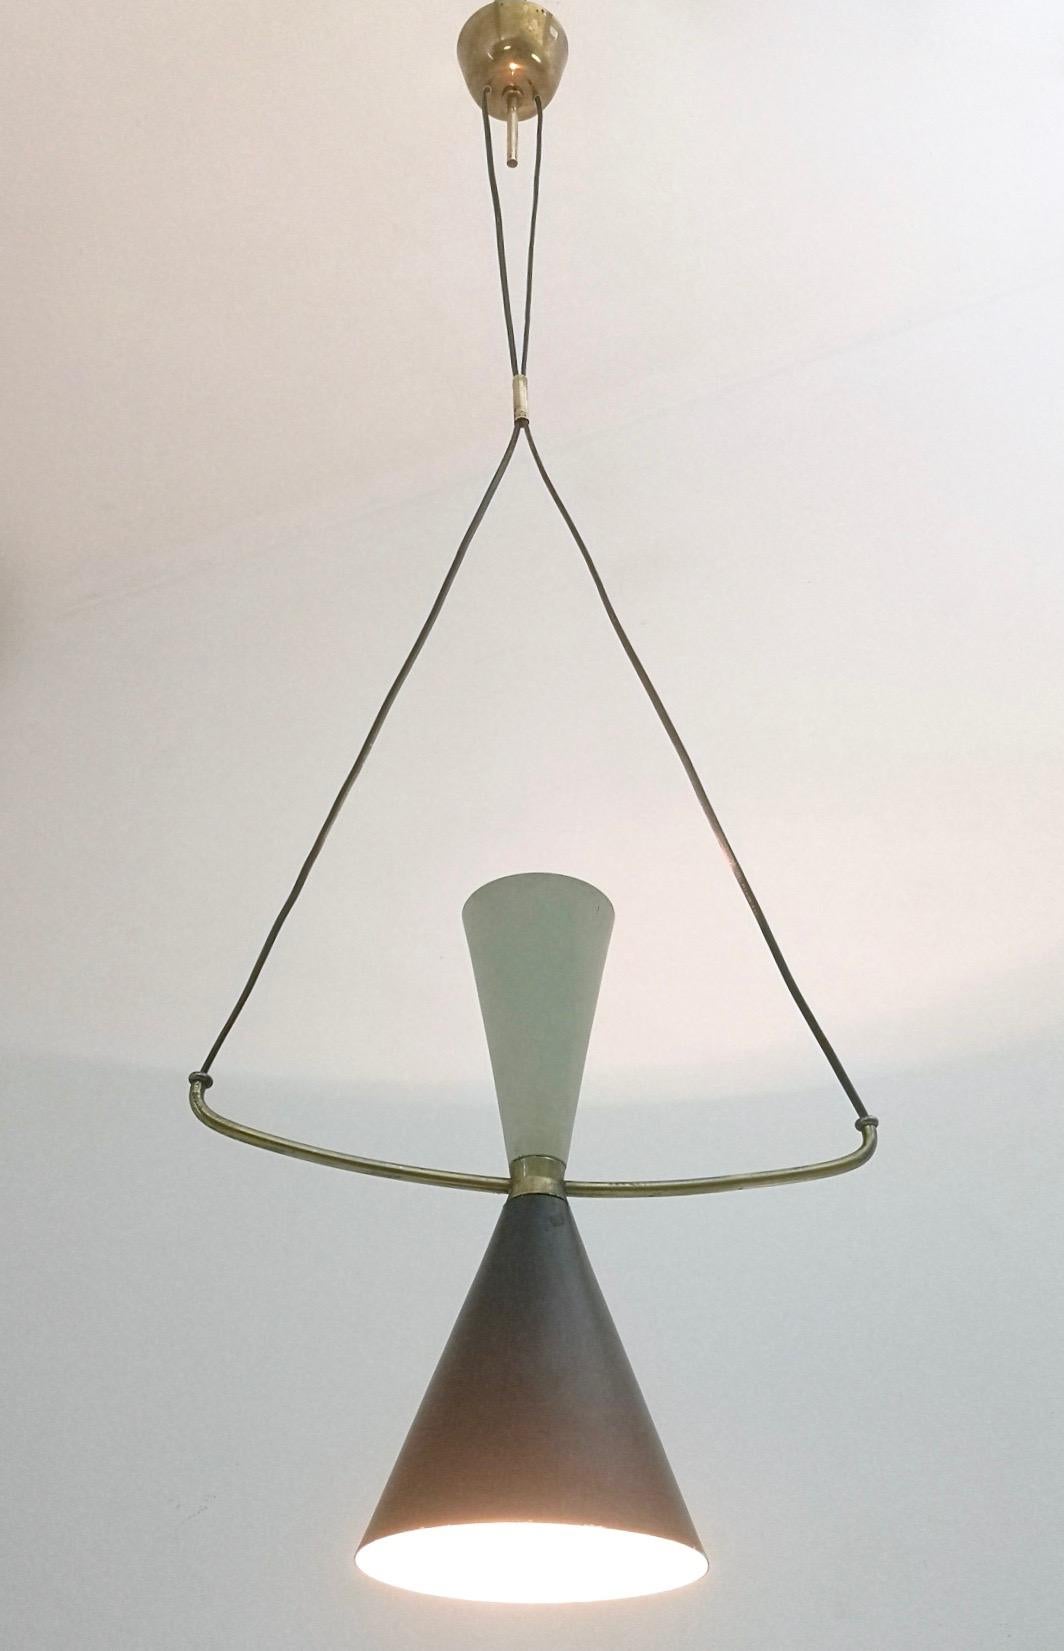 Italian Vintage Beige and Black Varnished Steel and Brass Pendant by Stilnovo, Italy